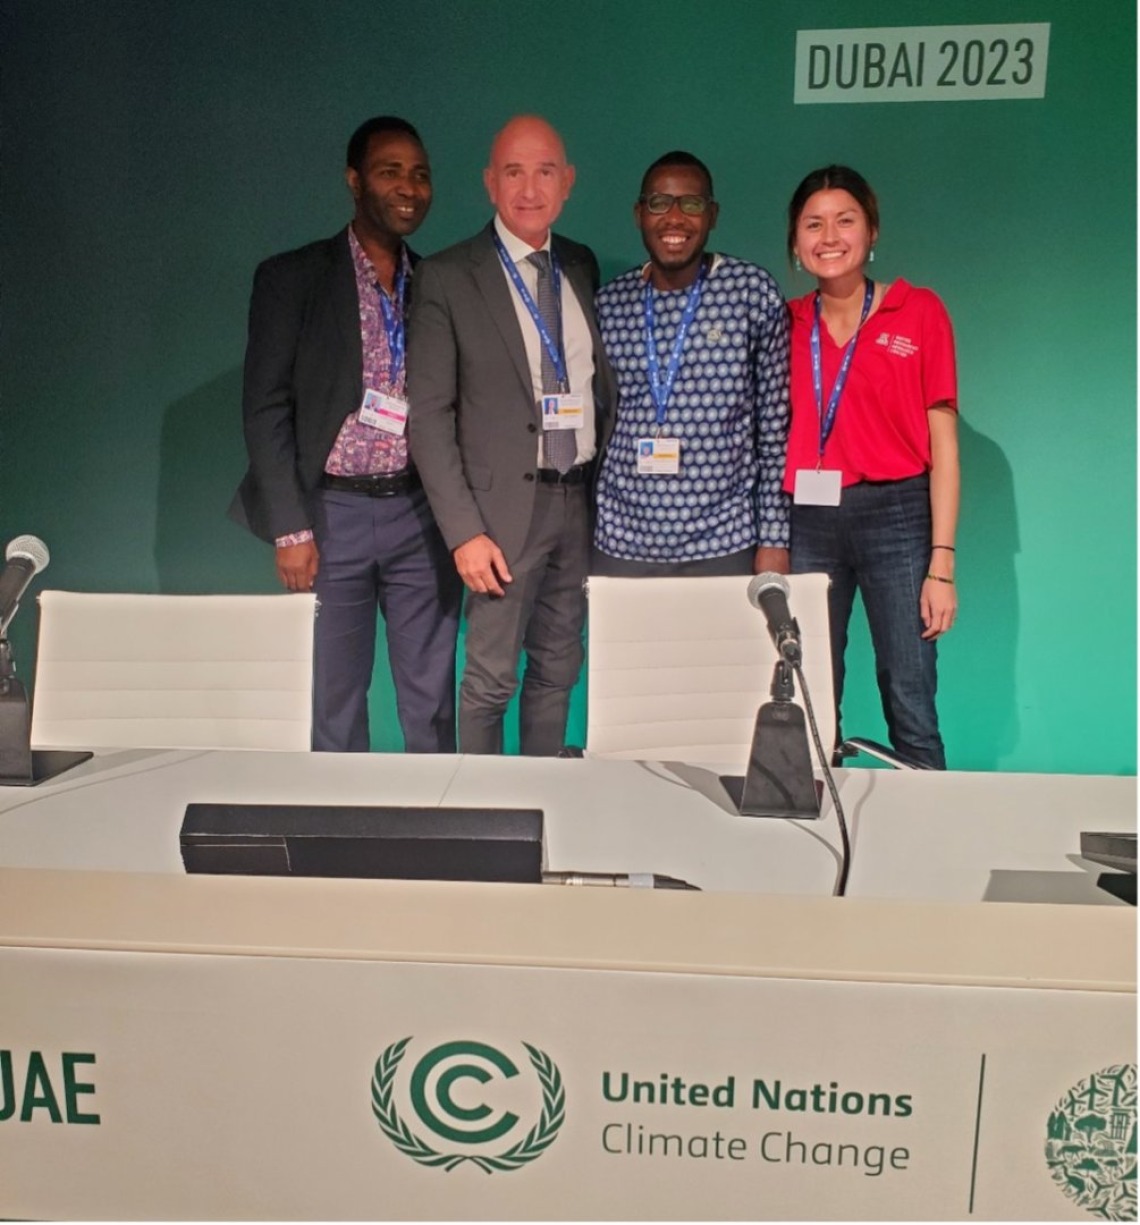 Meeting Taylor Brooke from the University of Arizona, along with Prof. Moses Oludayo Tade and Dr. H. Mohammed, at a panel discussion on climate change and health.